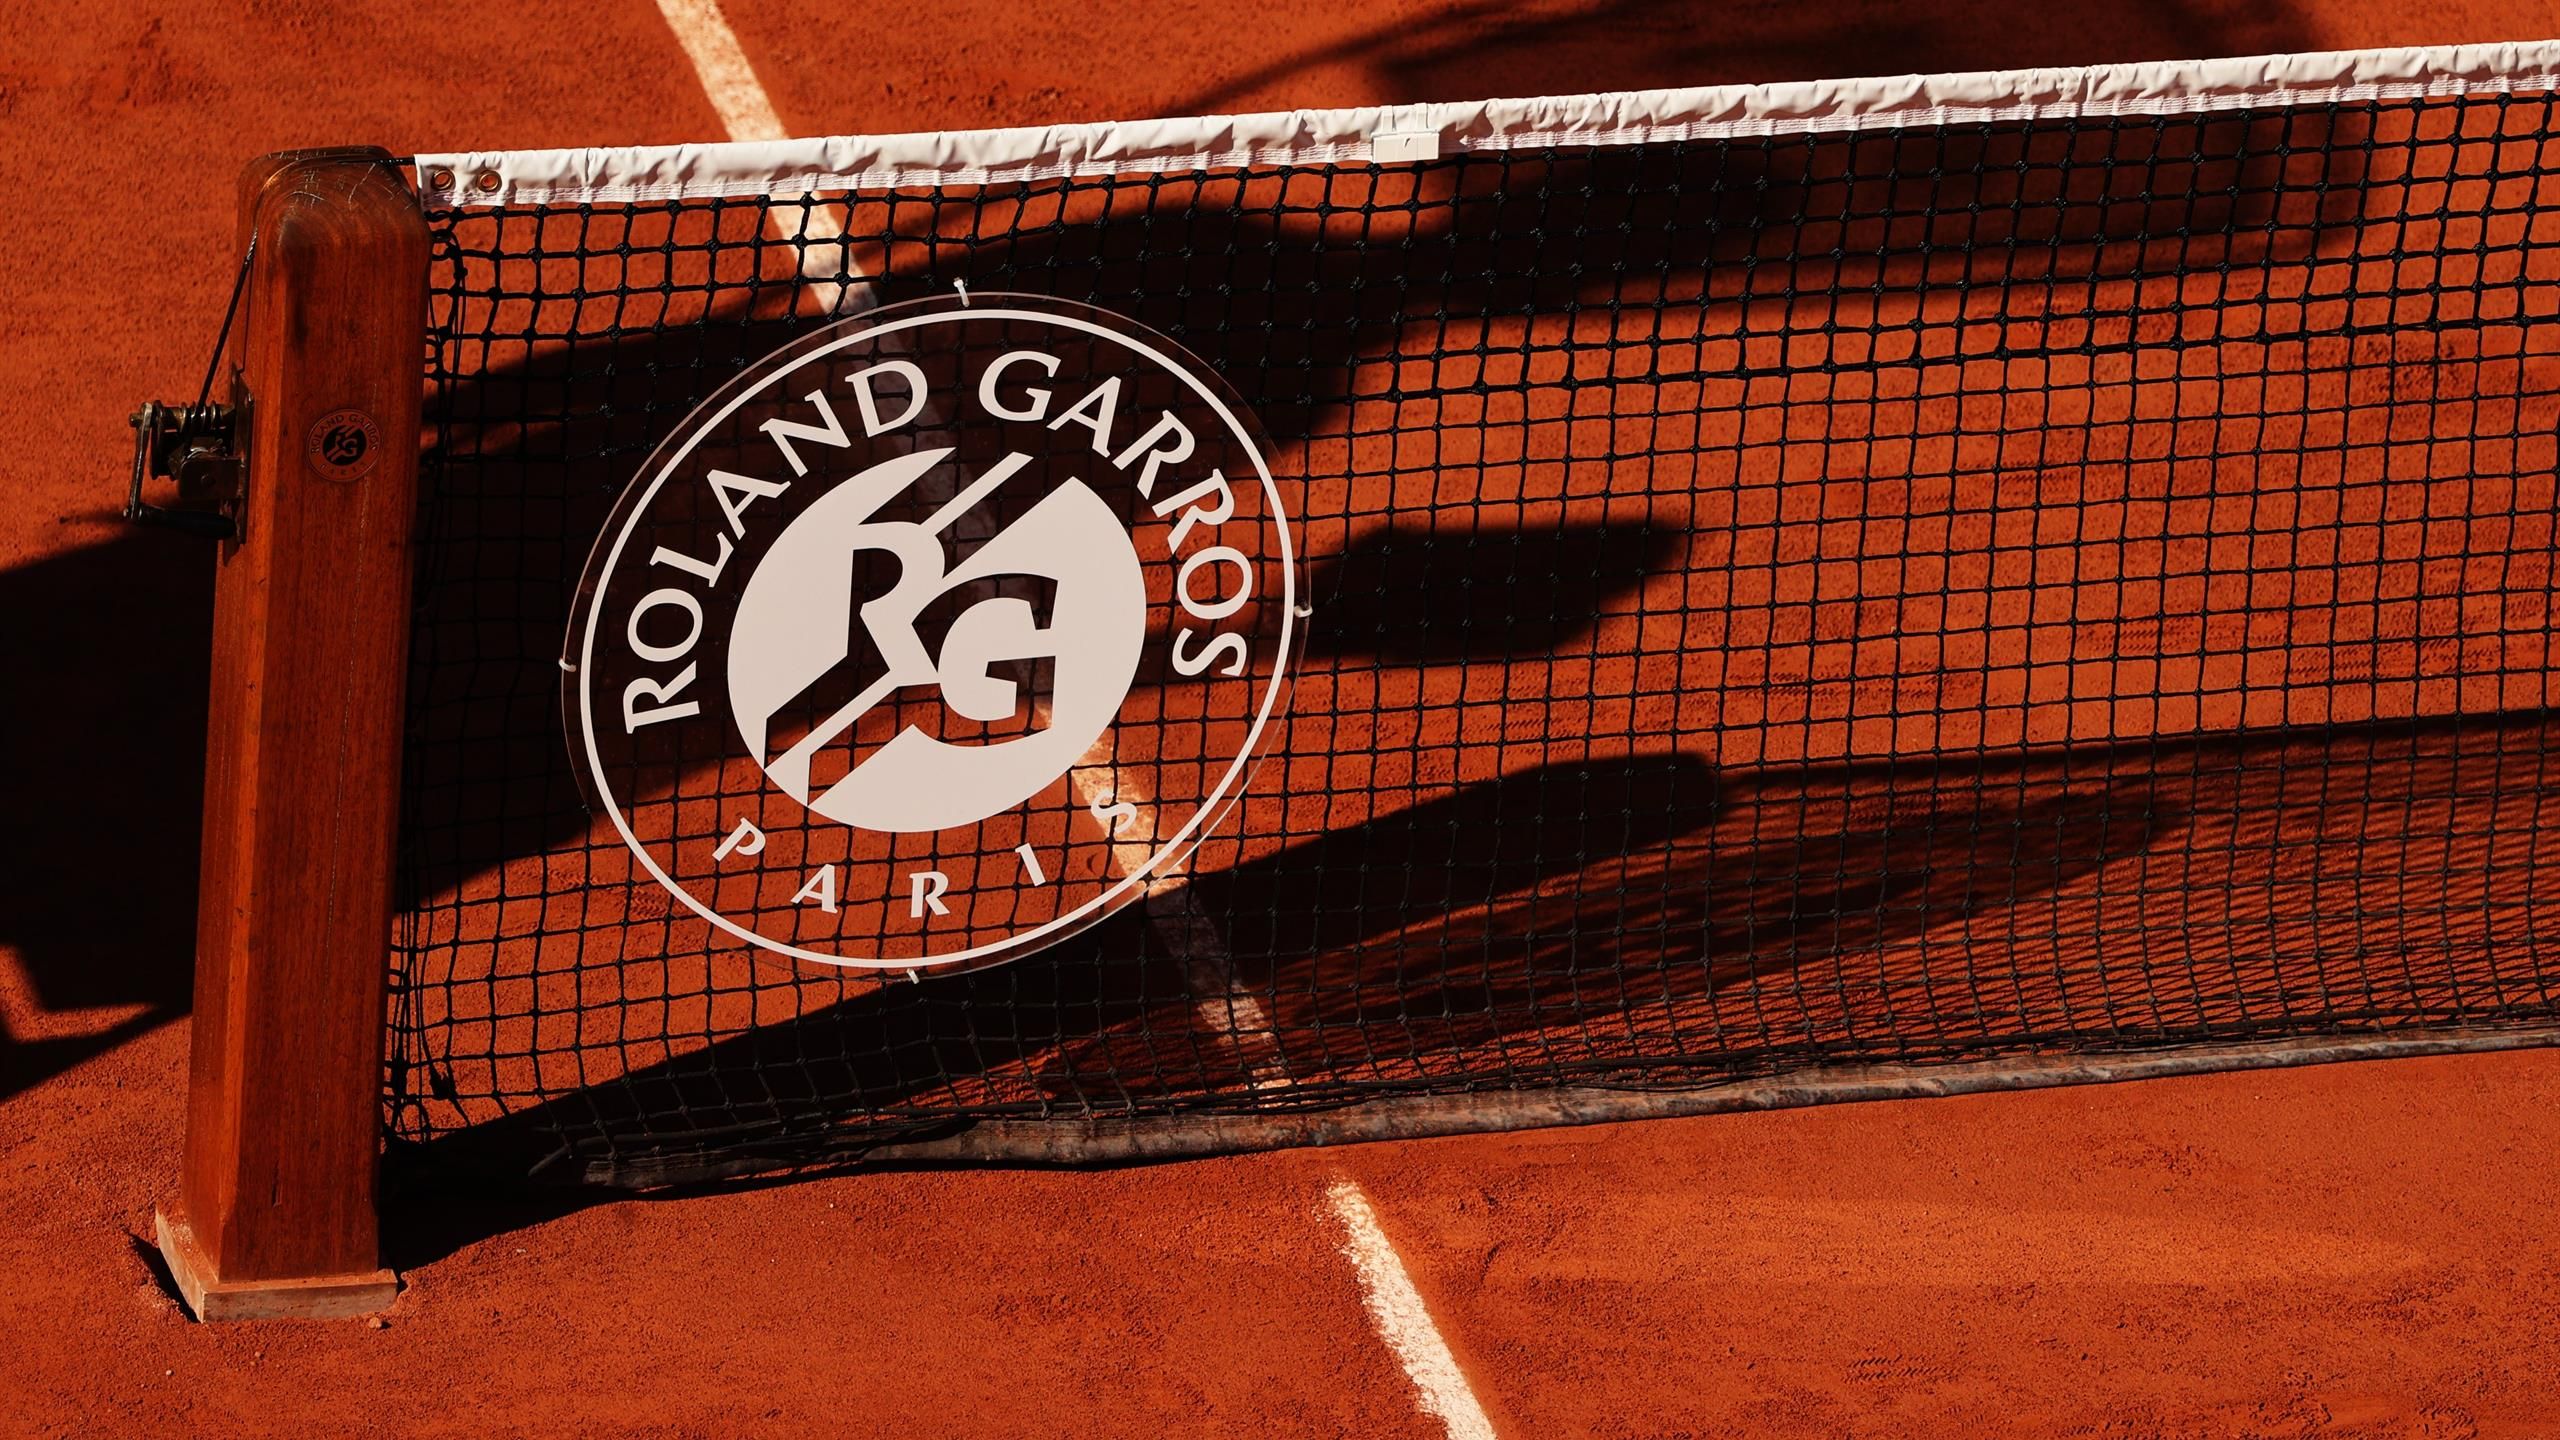 Roland-Garros to remain on Discovery platforms in long-term deal with FFT